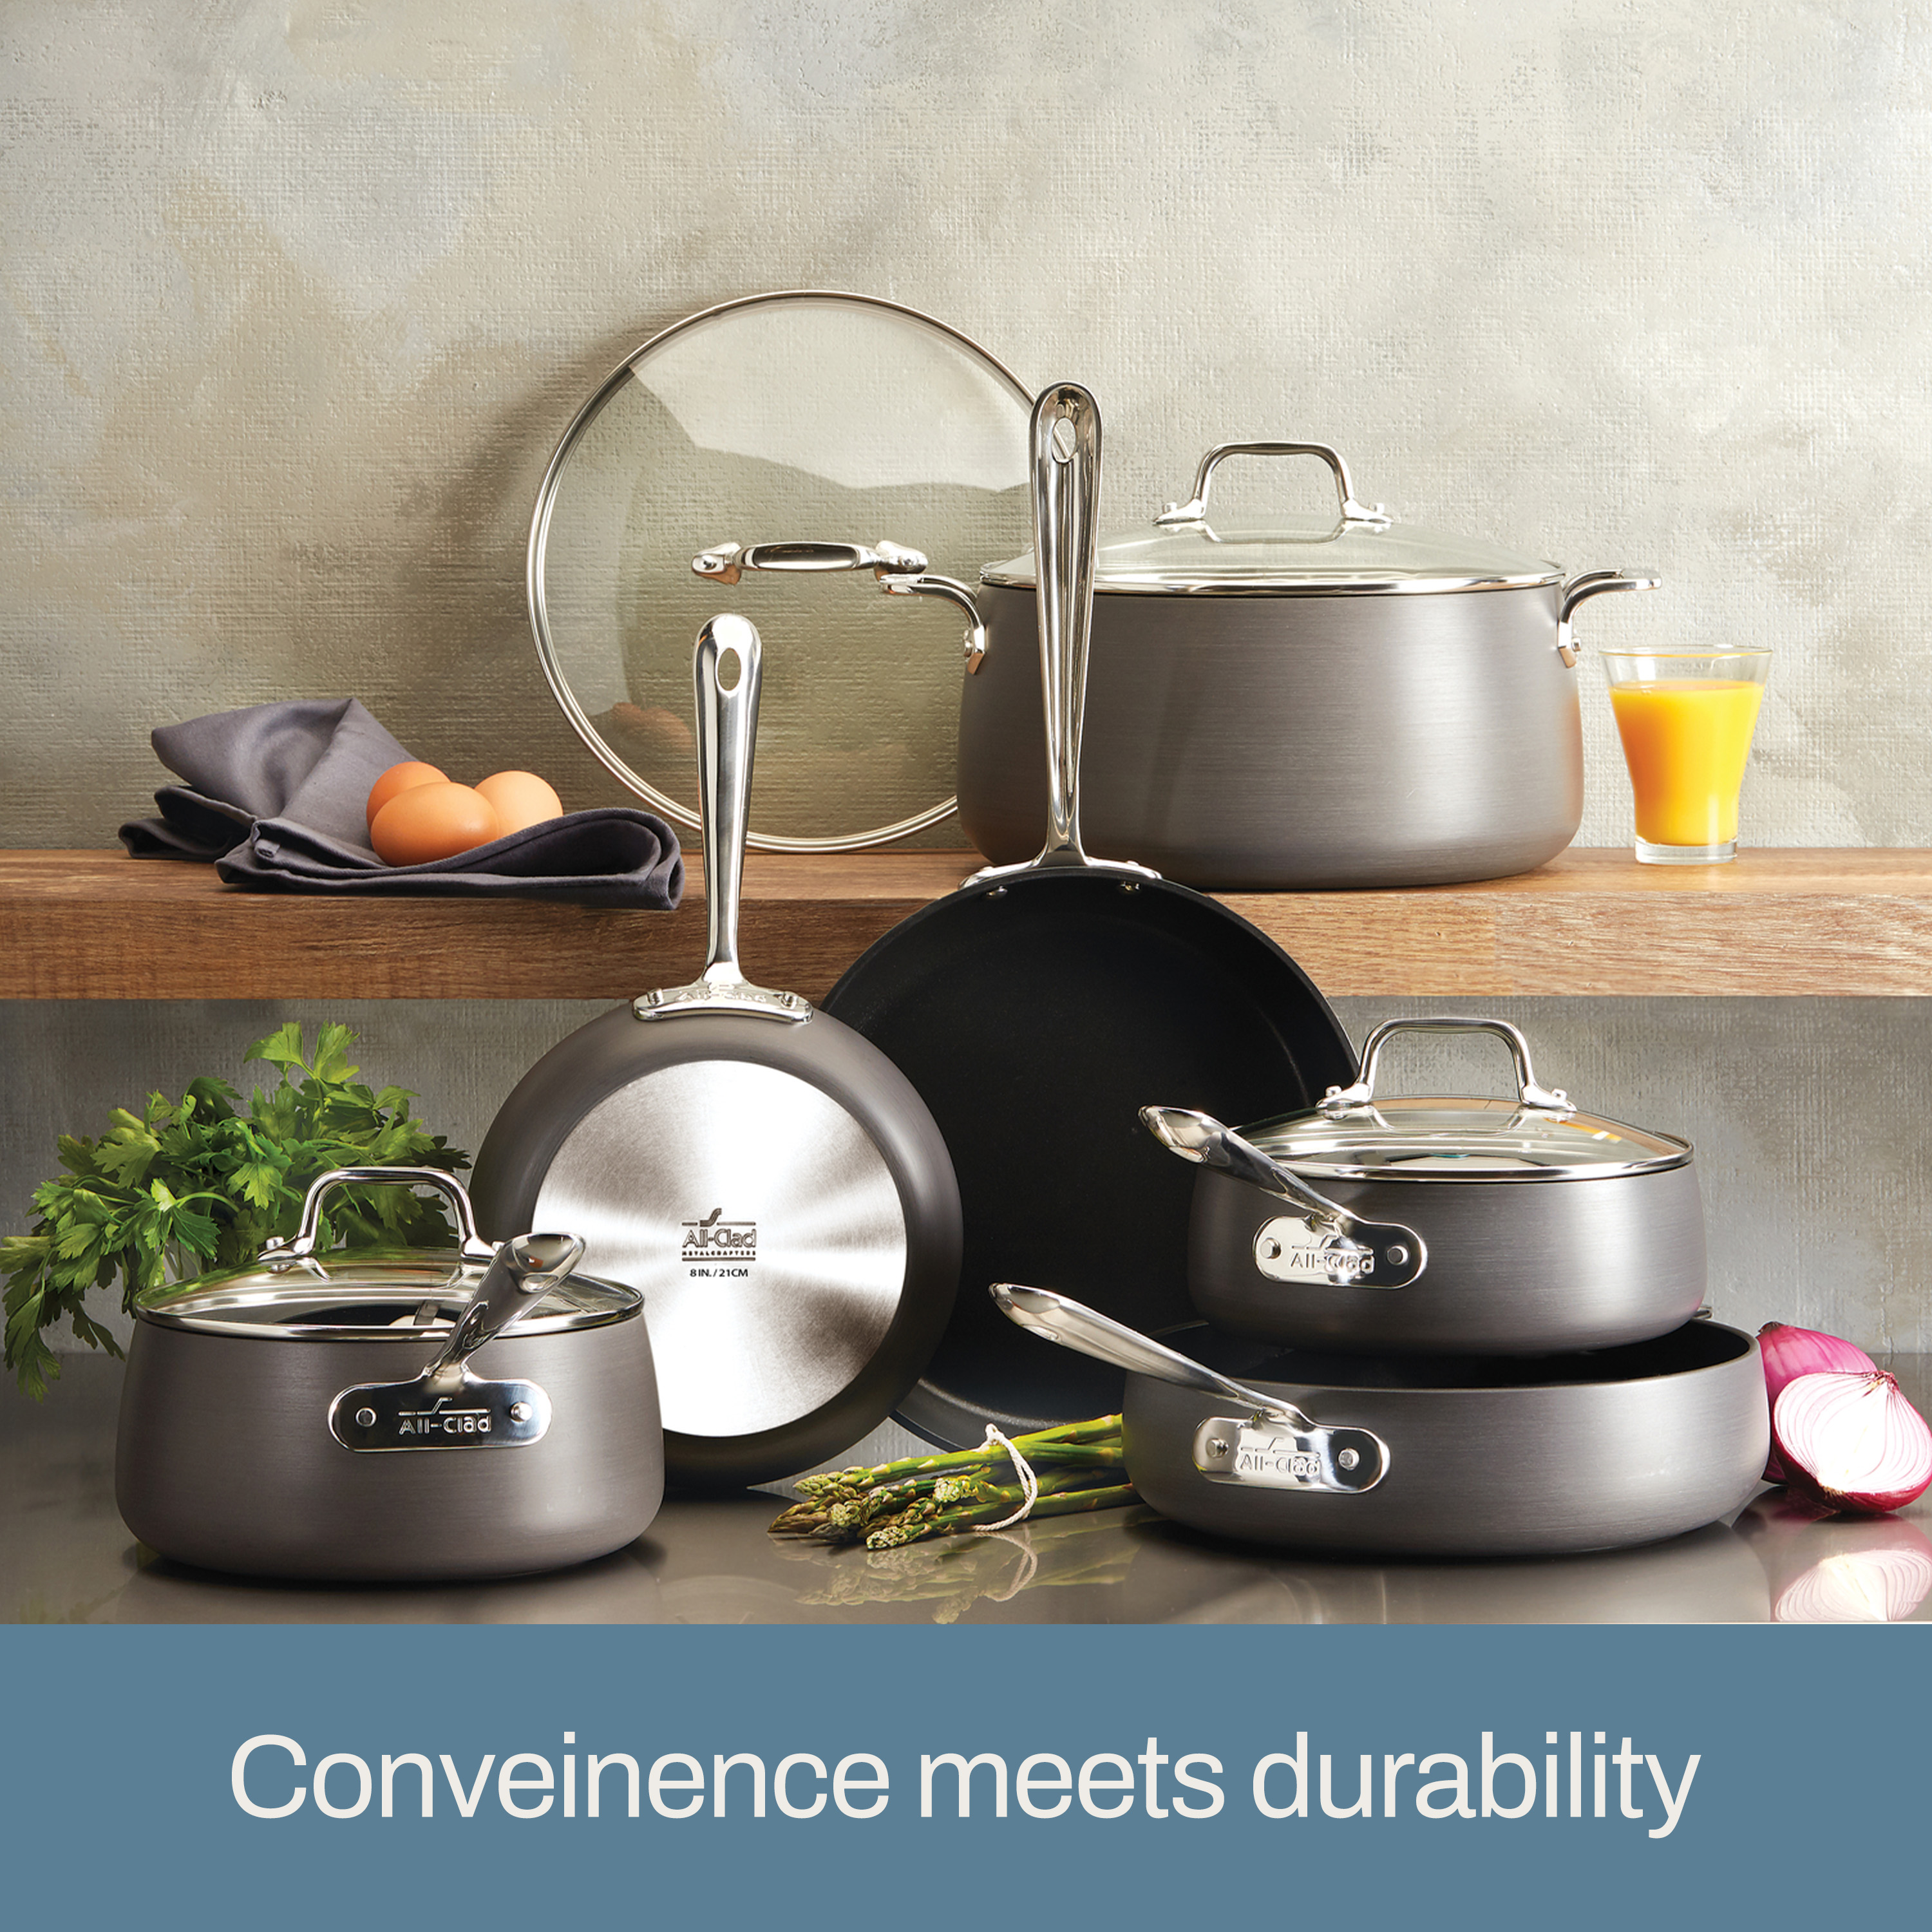 All-Clad HA1 Hard Anodized Nonstick Cookware, 10 Piece Set - image 3 of 9